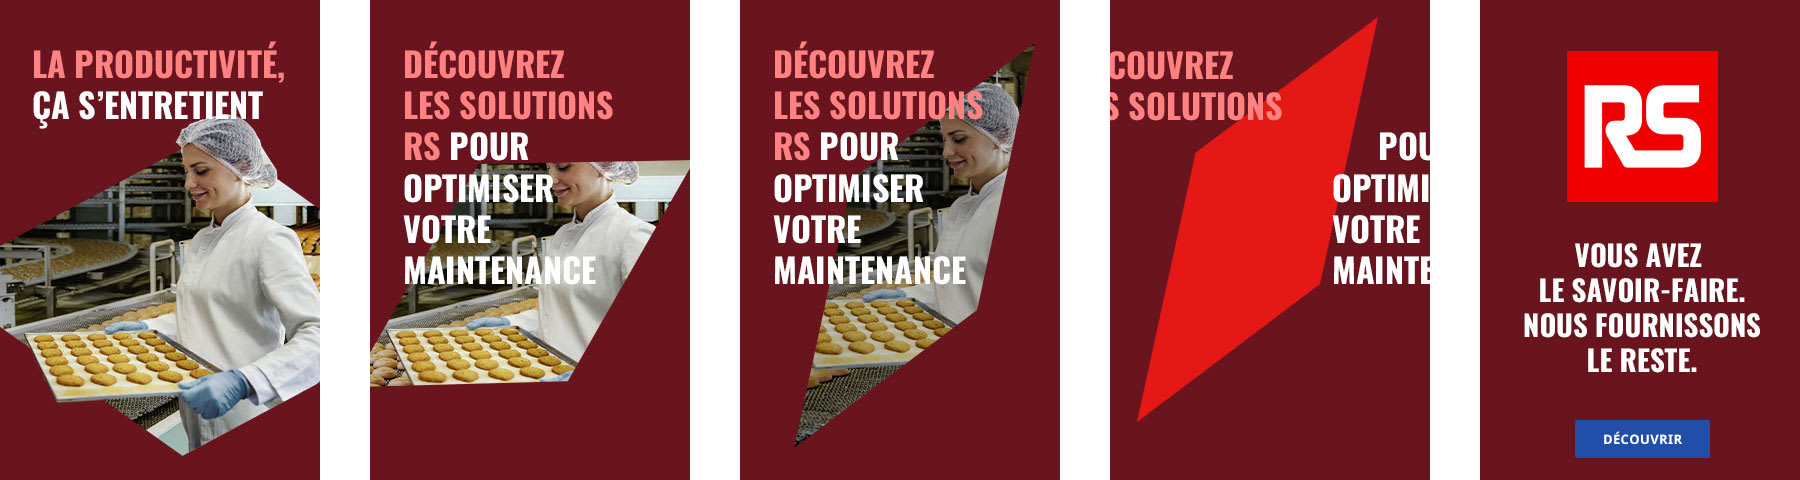 RS Display Nouvelle campagne communication